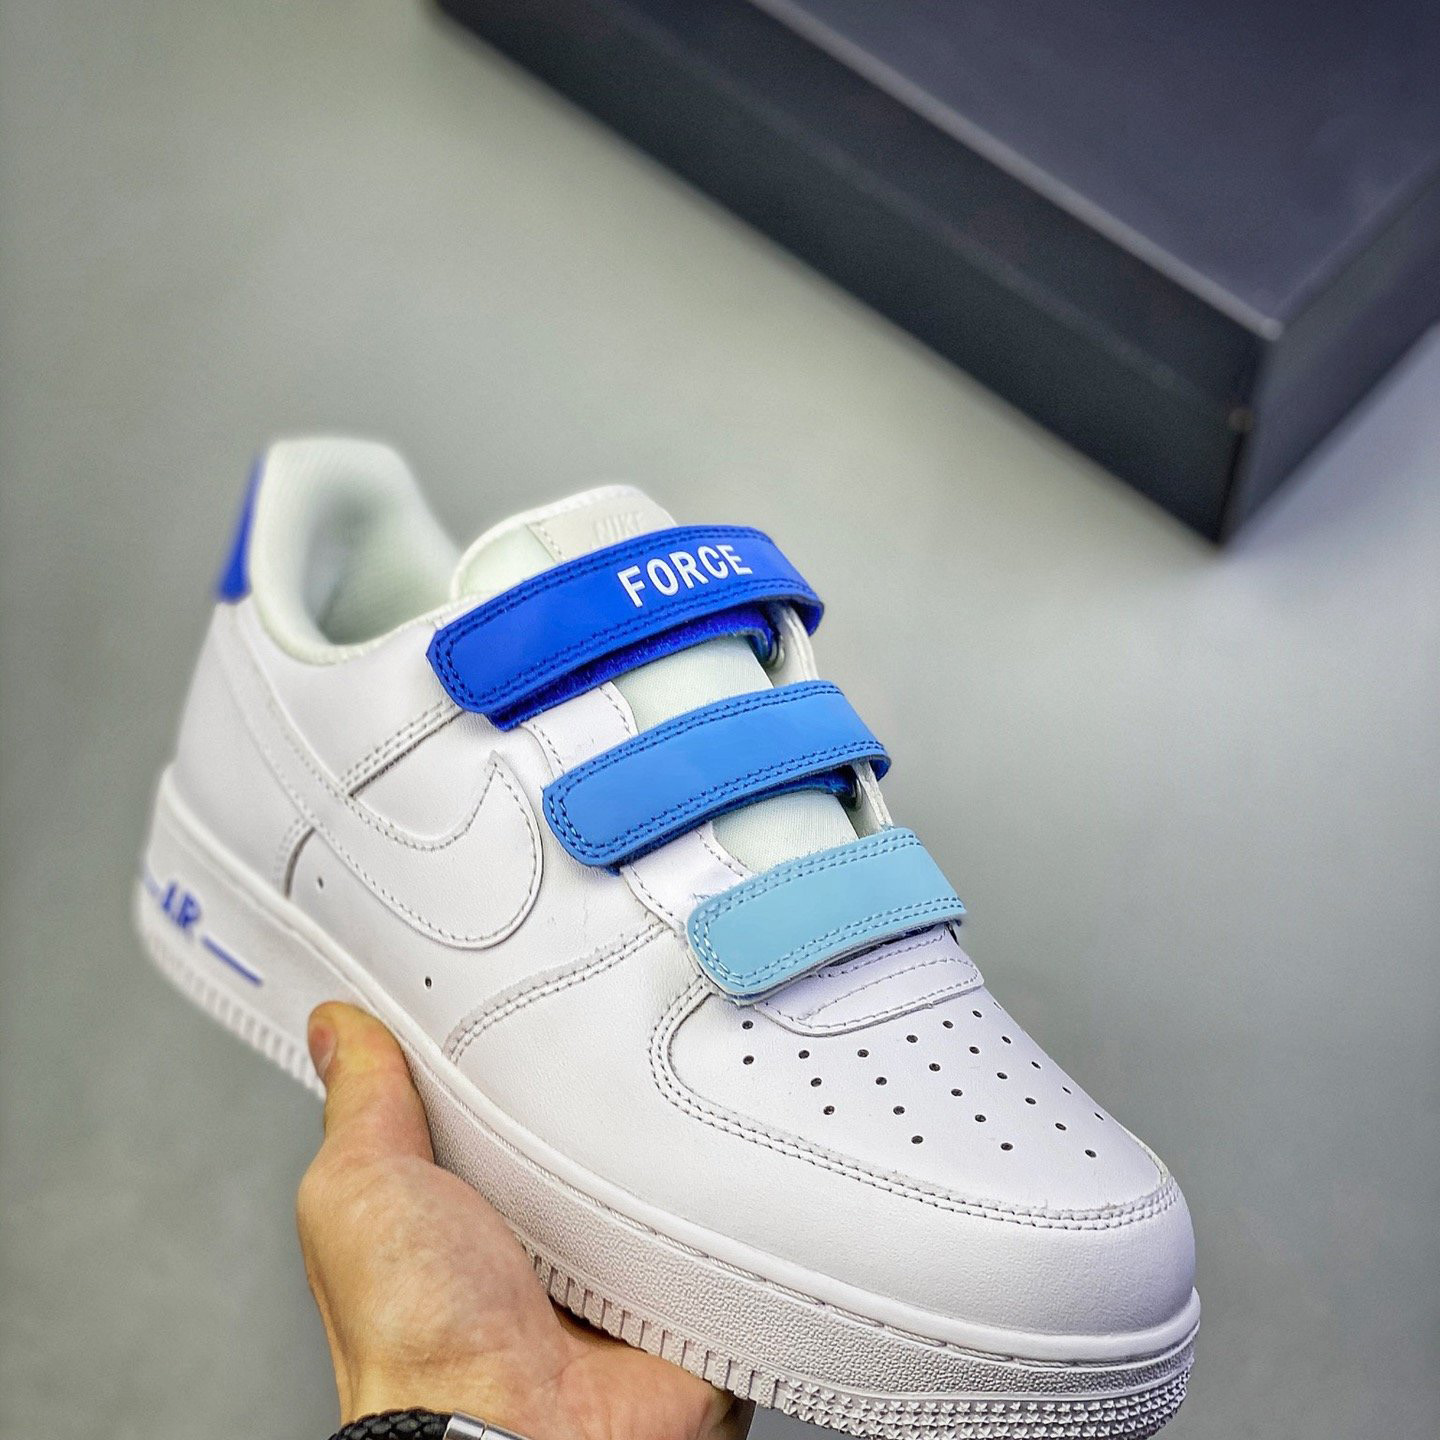 AIR FORCE 1 Velcro leisure sports shoes 